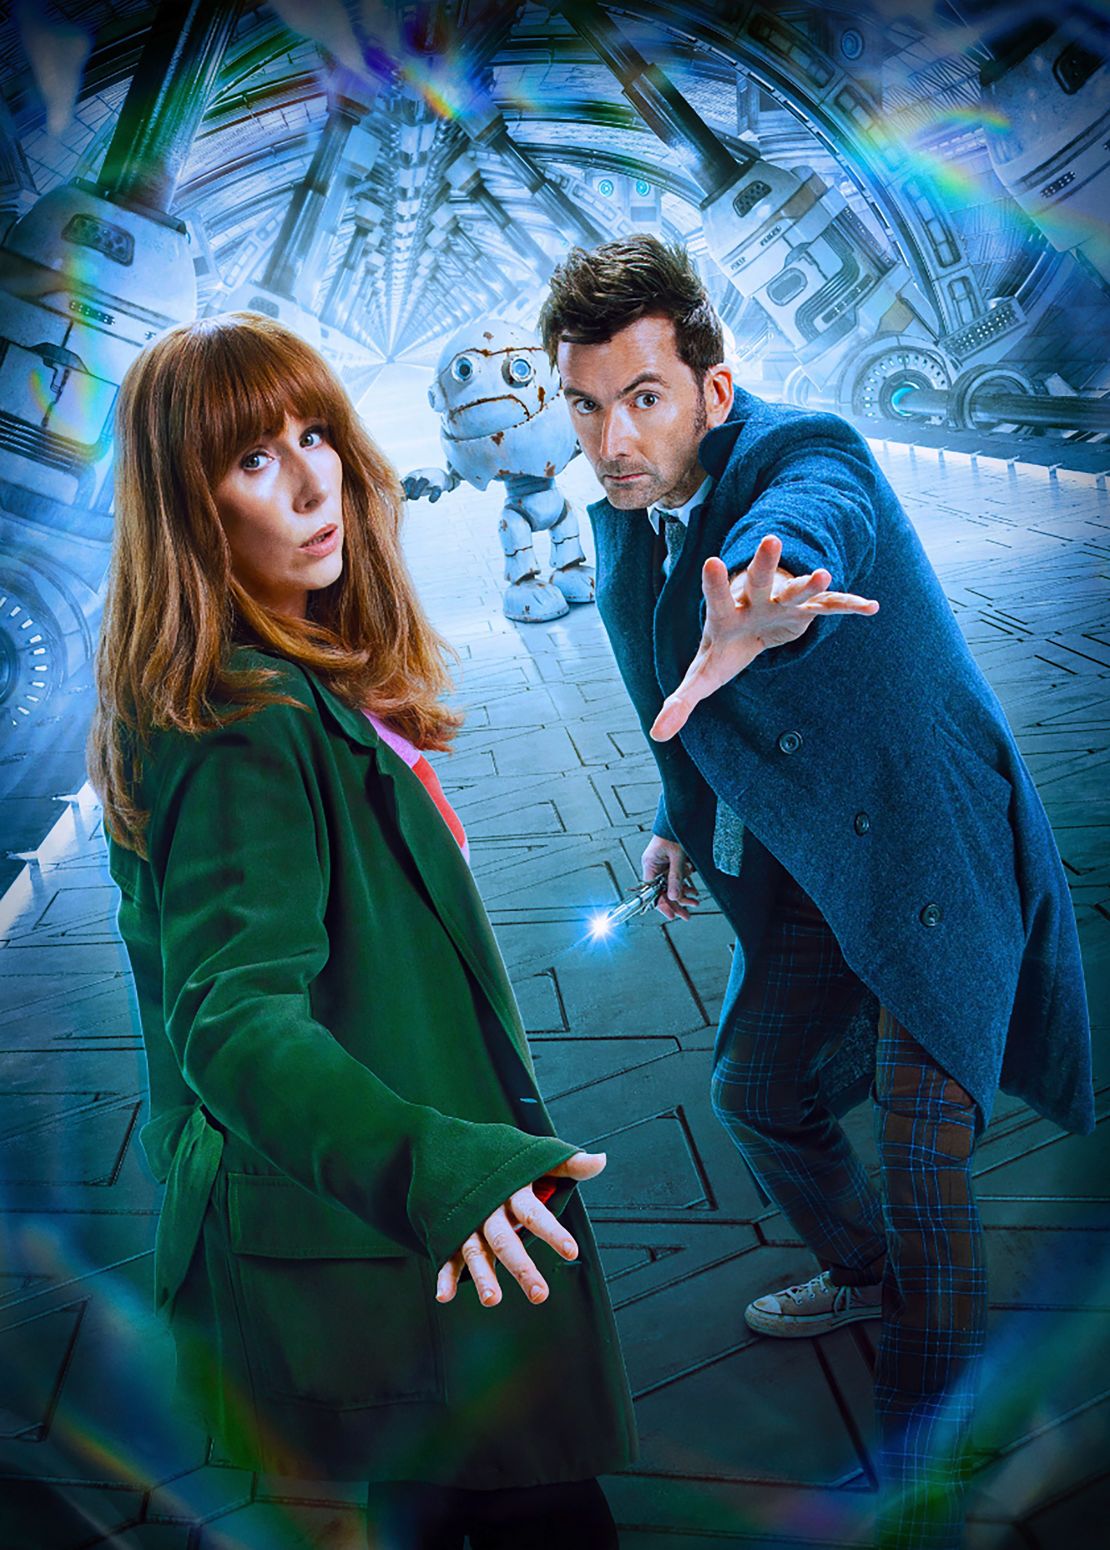 Catherine Tate and David Tennant star in "Doctor Who."